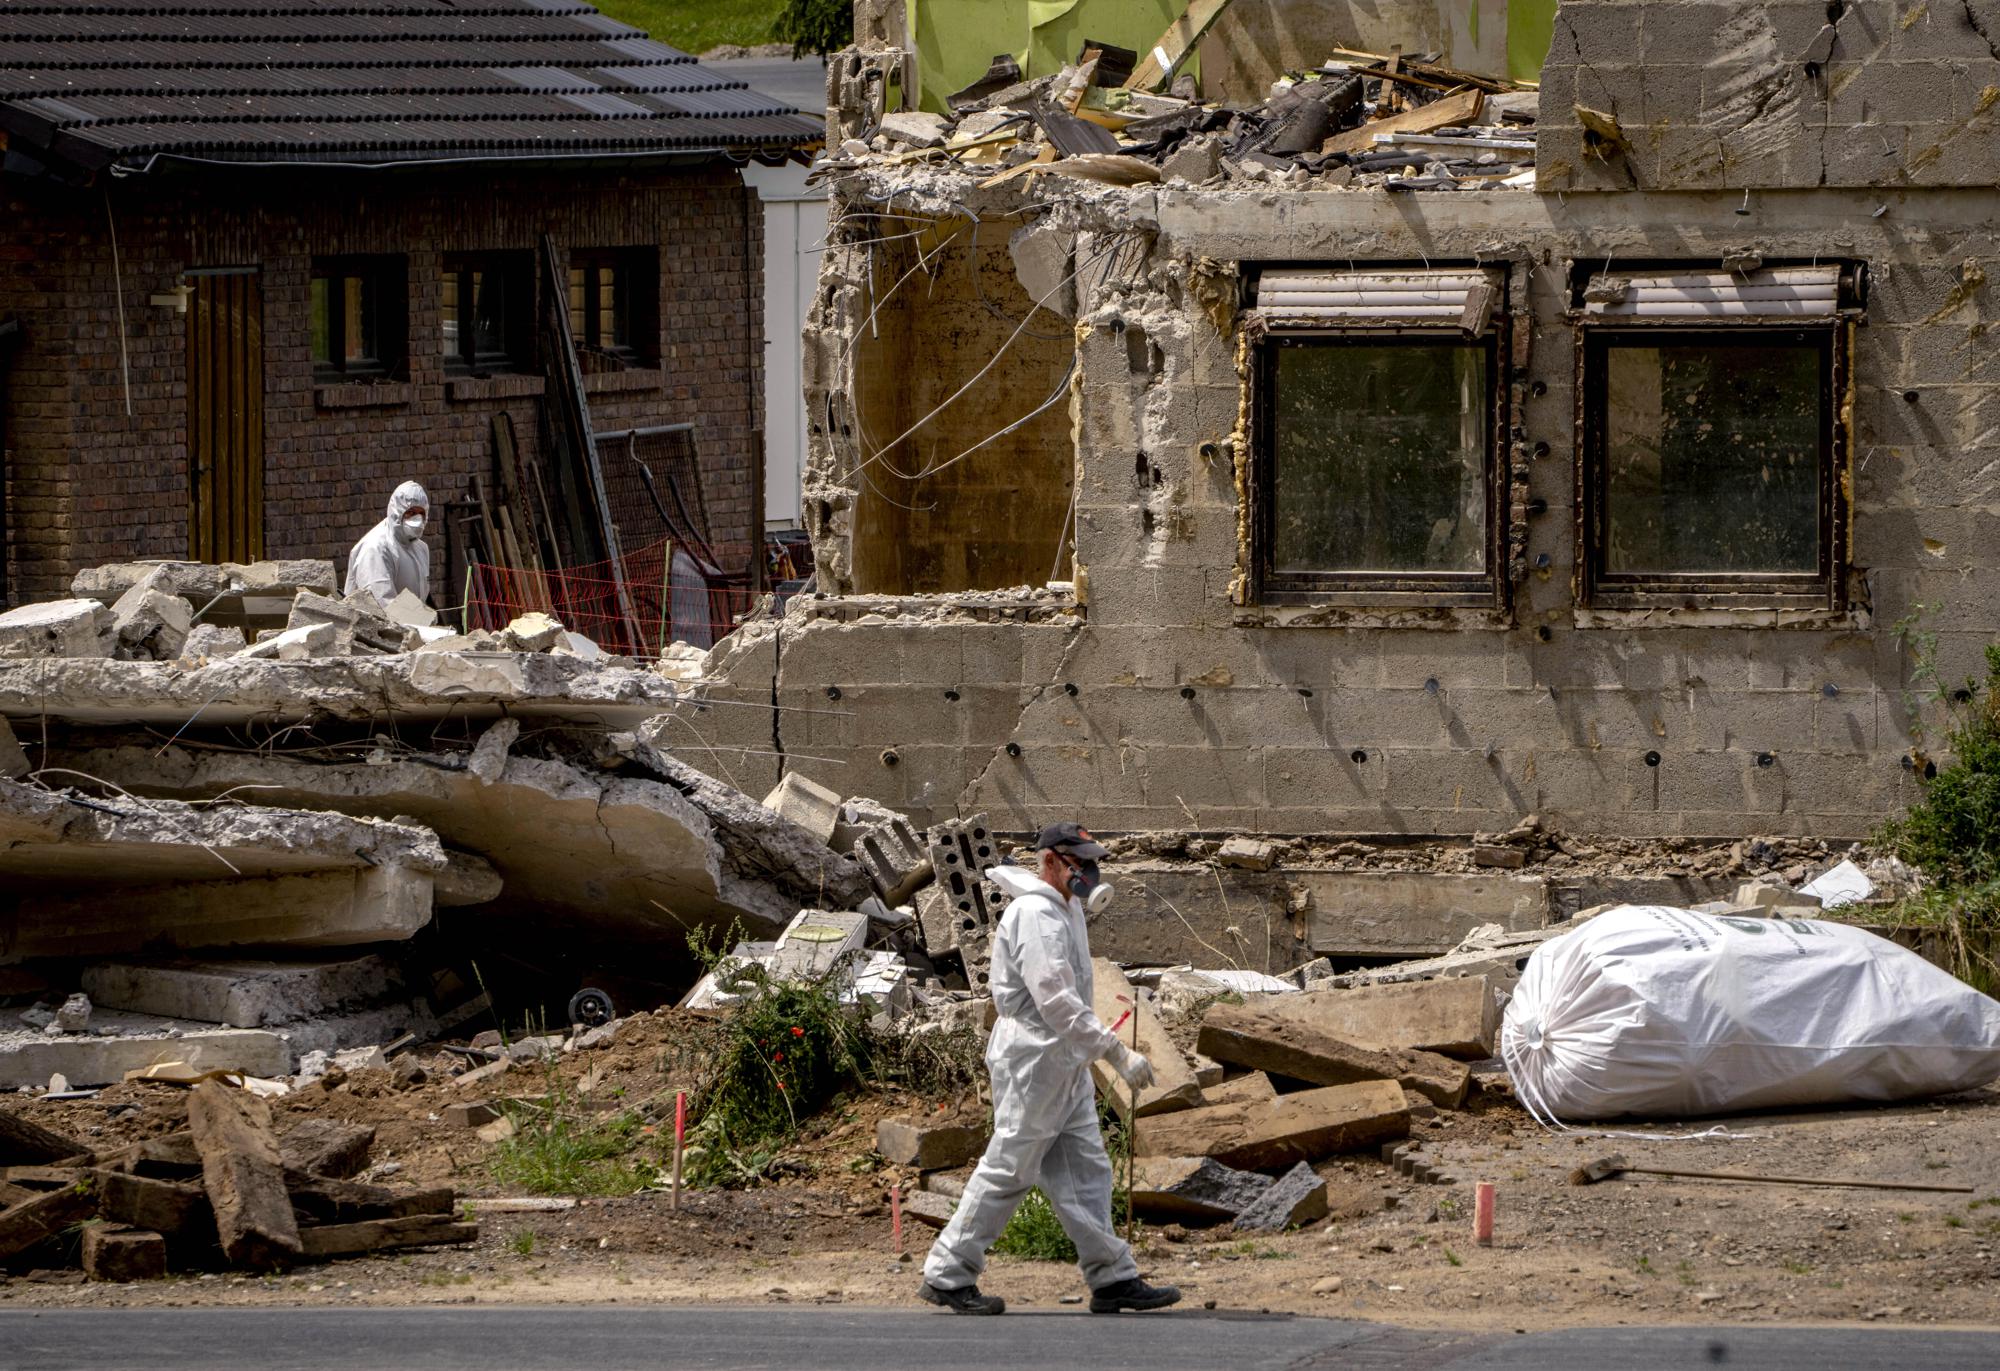 A worker walks by a home damaged from last year's floods, that is now torn down in the village of Ahrbrueck in the Ahrtal valley, Germany, Wednesday, July 6, 2022. Flooding caused by heavy rain hit the region on July 14, 2021 causing the death of about 130 people. (AP Photo/Michael Probst)